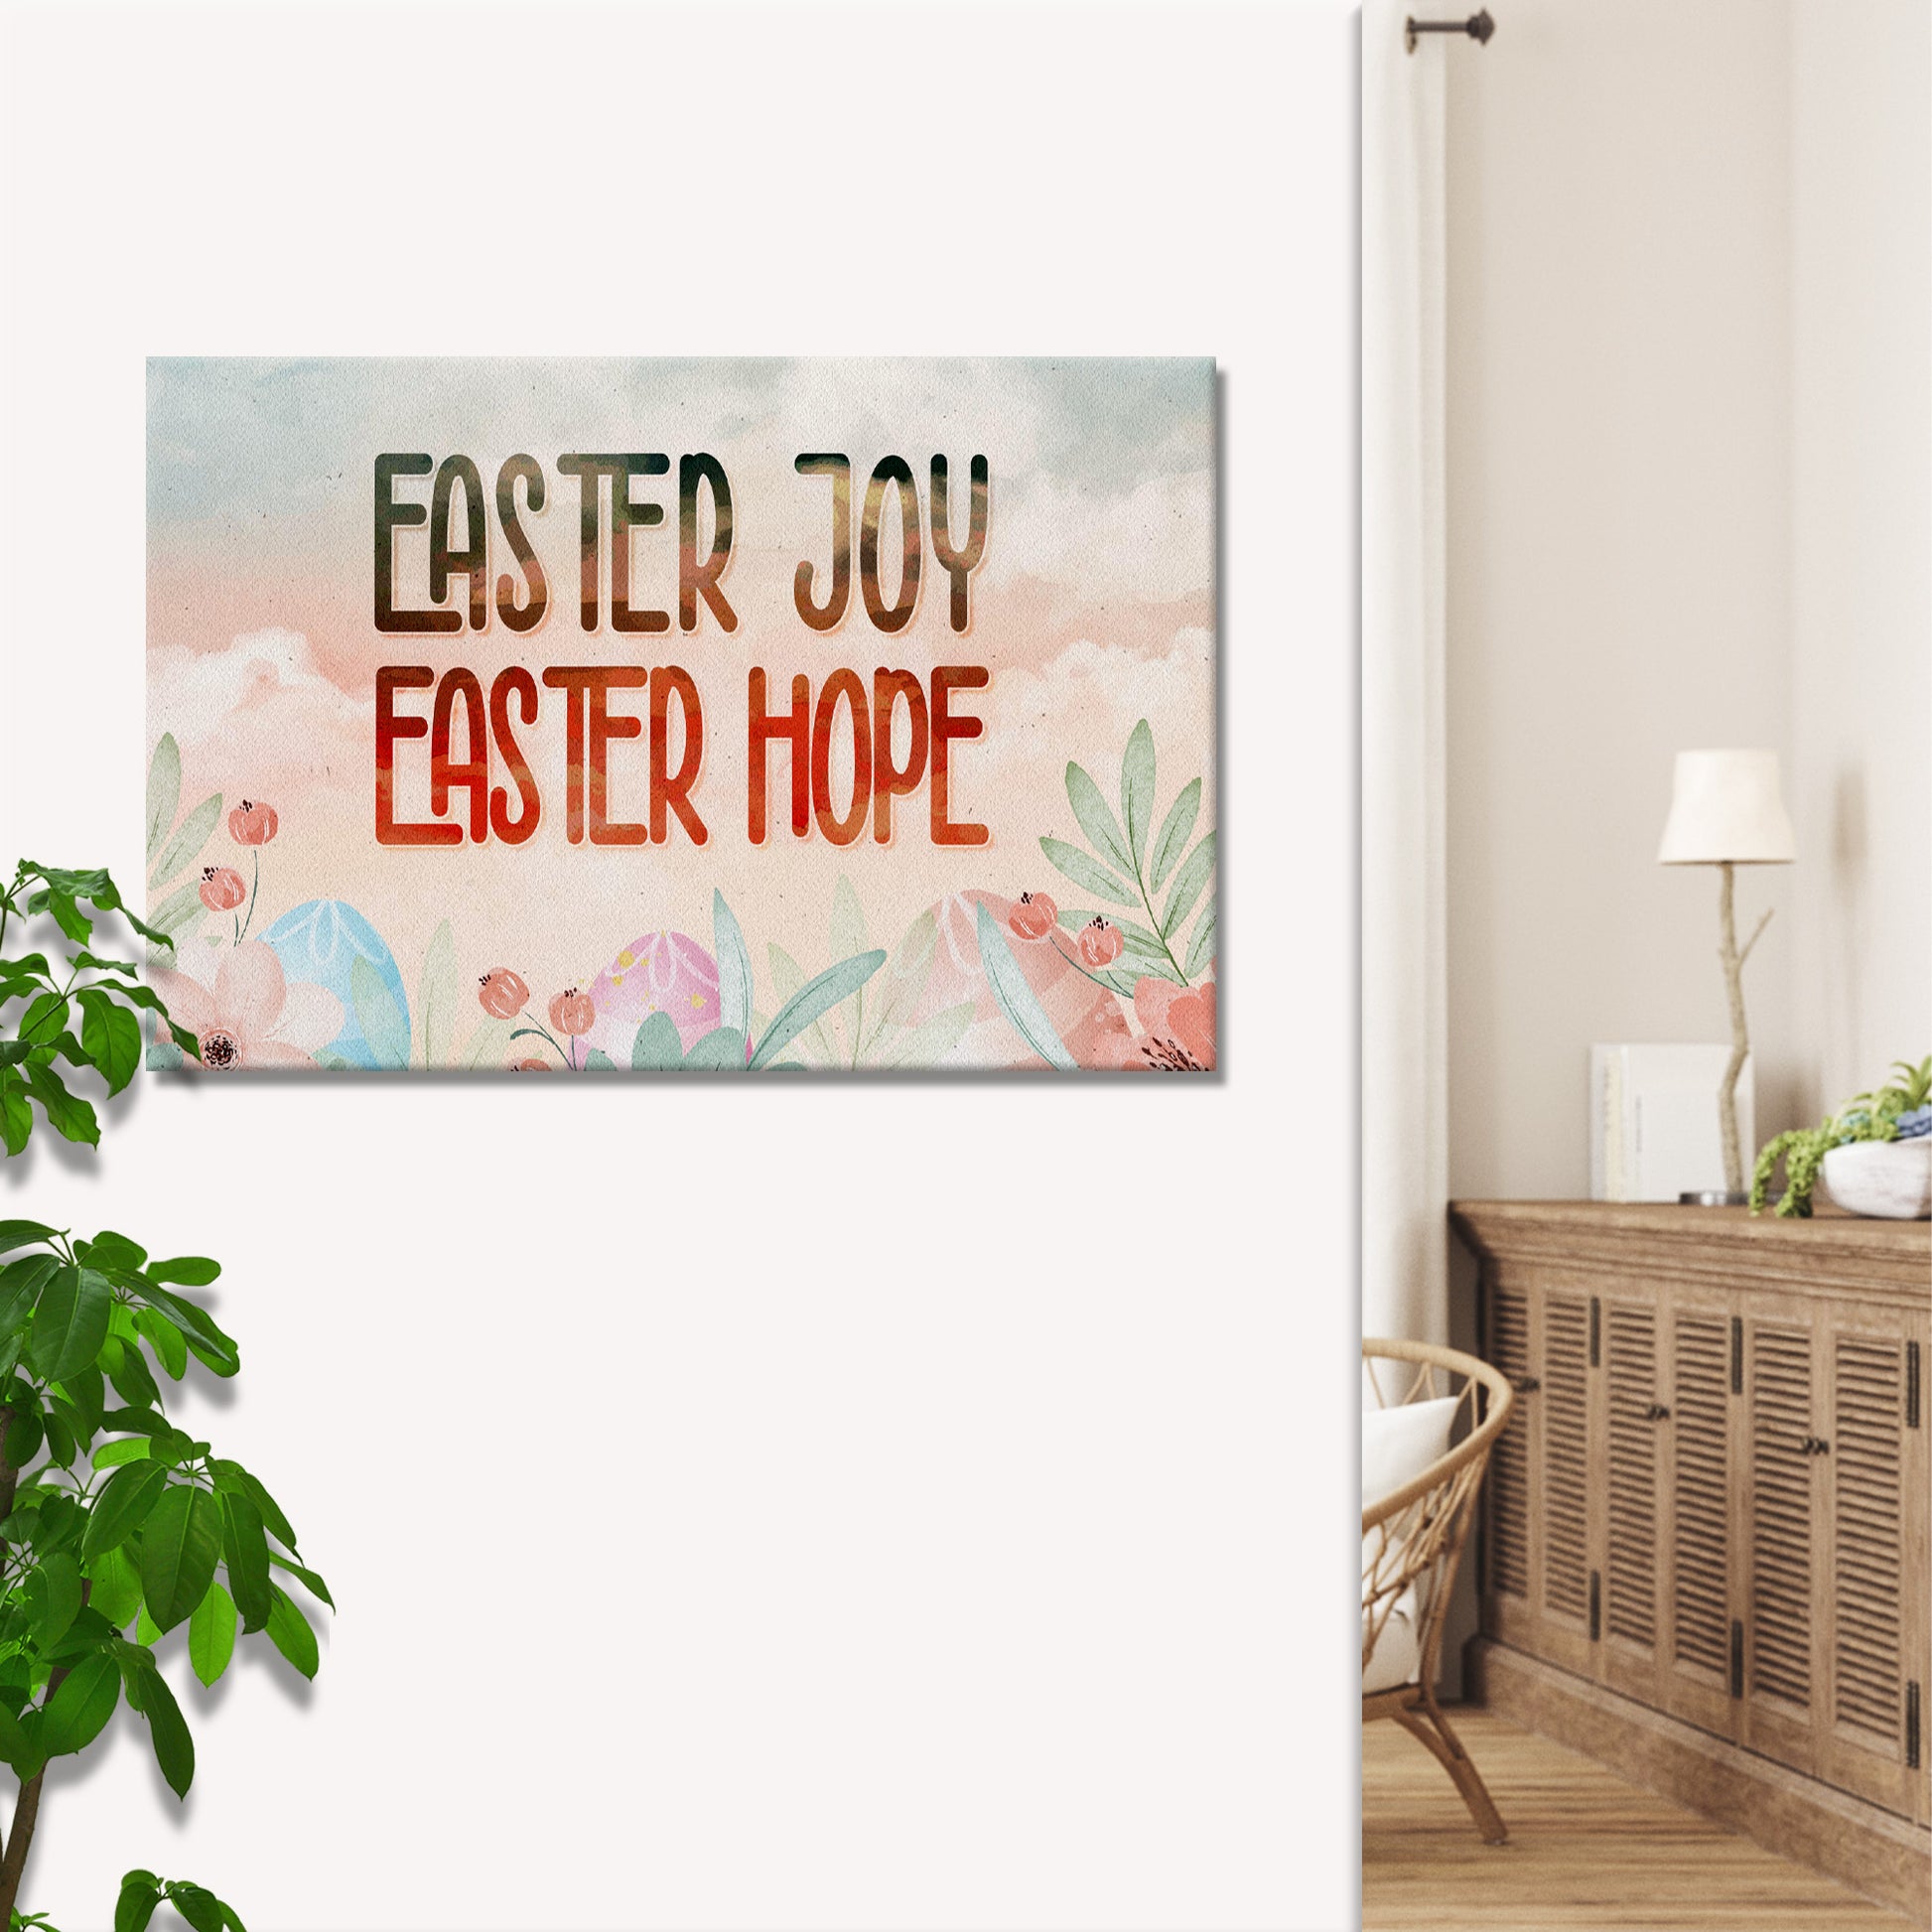 Easter Joy, Easter Hope Sign Style 1 - Image by Tailored Canvases